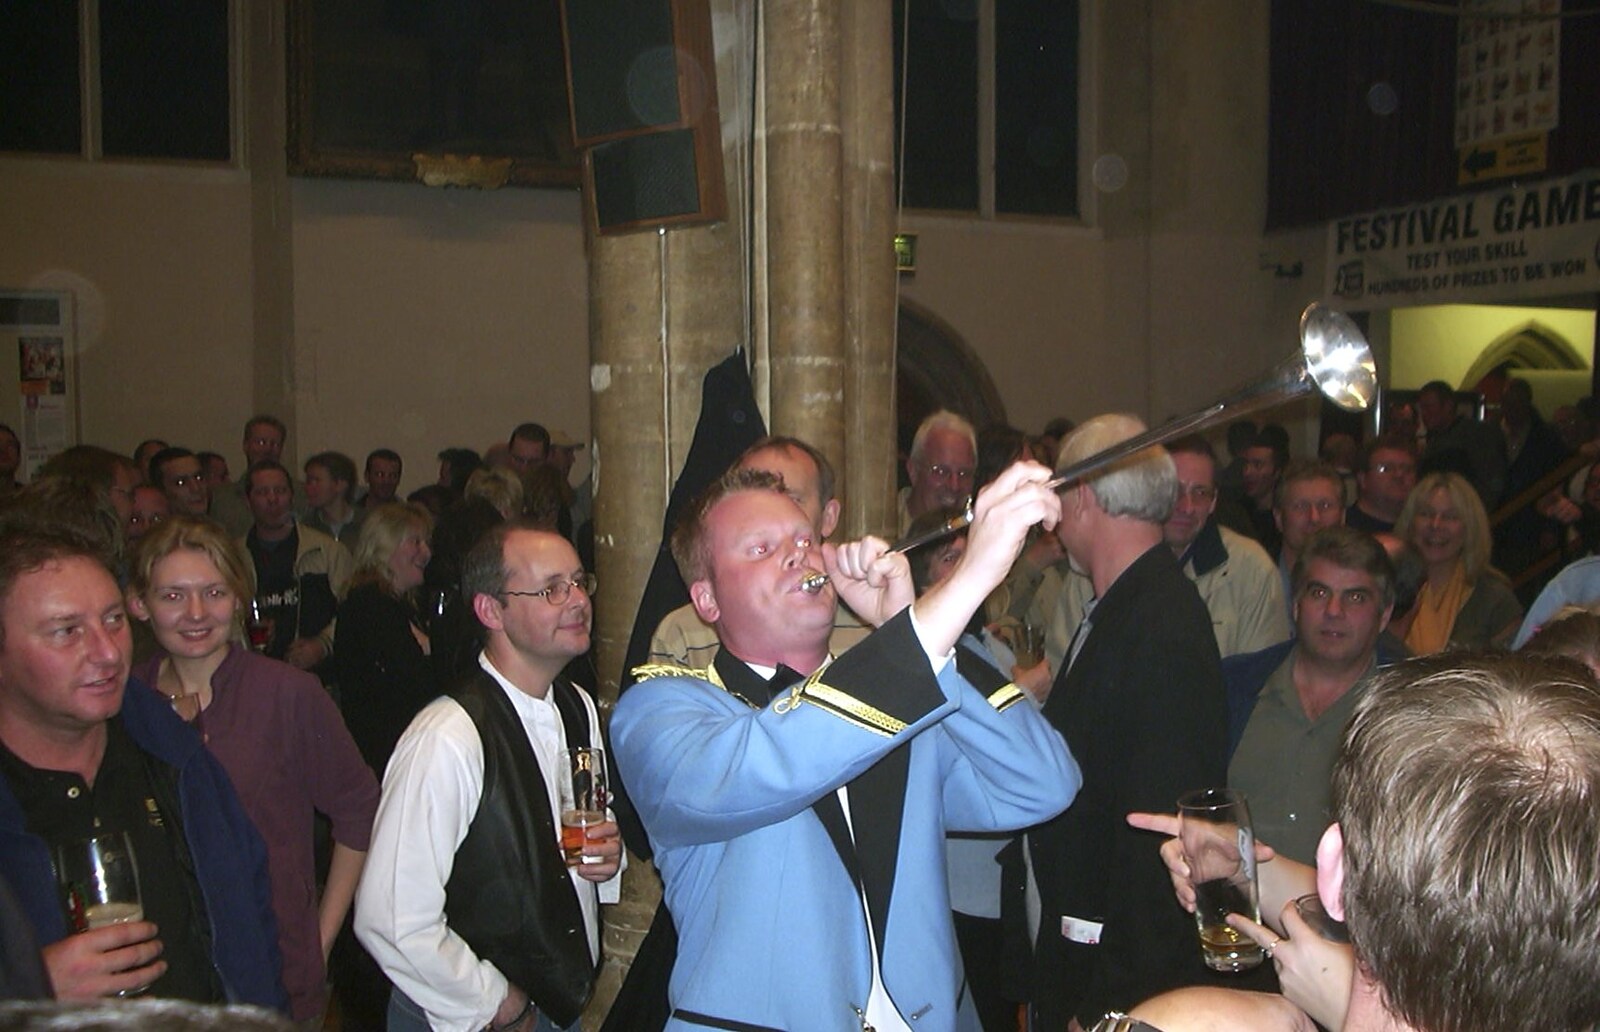 The Post-horn Gallop is played from The Brome Swan at the Norwich Beer Festival, St. Andrew's Hall, Norwich - 29th October 2003